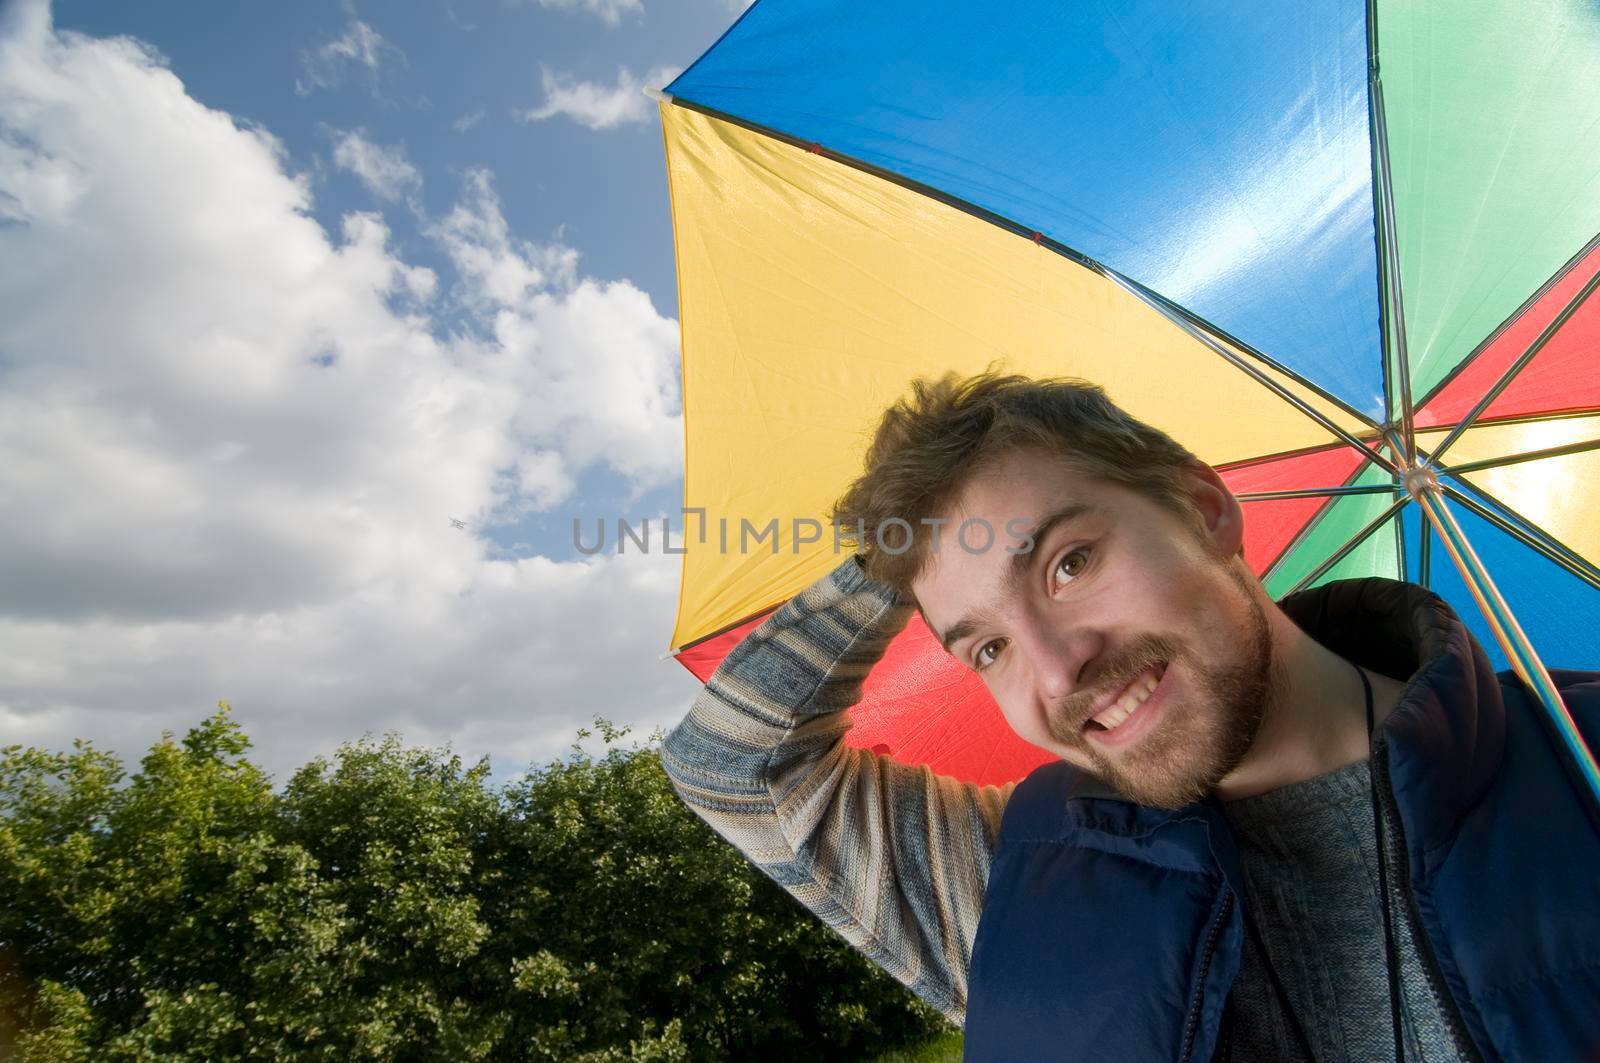 Young man in good mood with colorful umbrella.